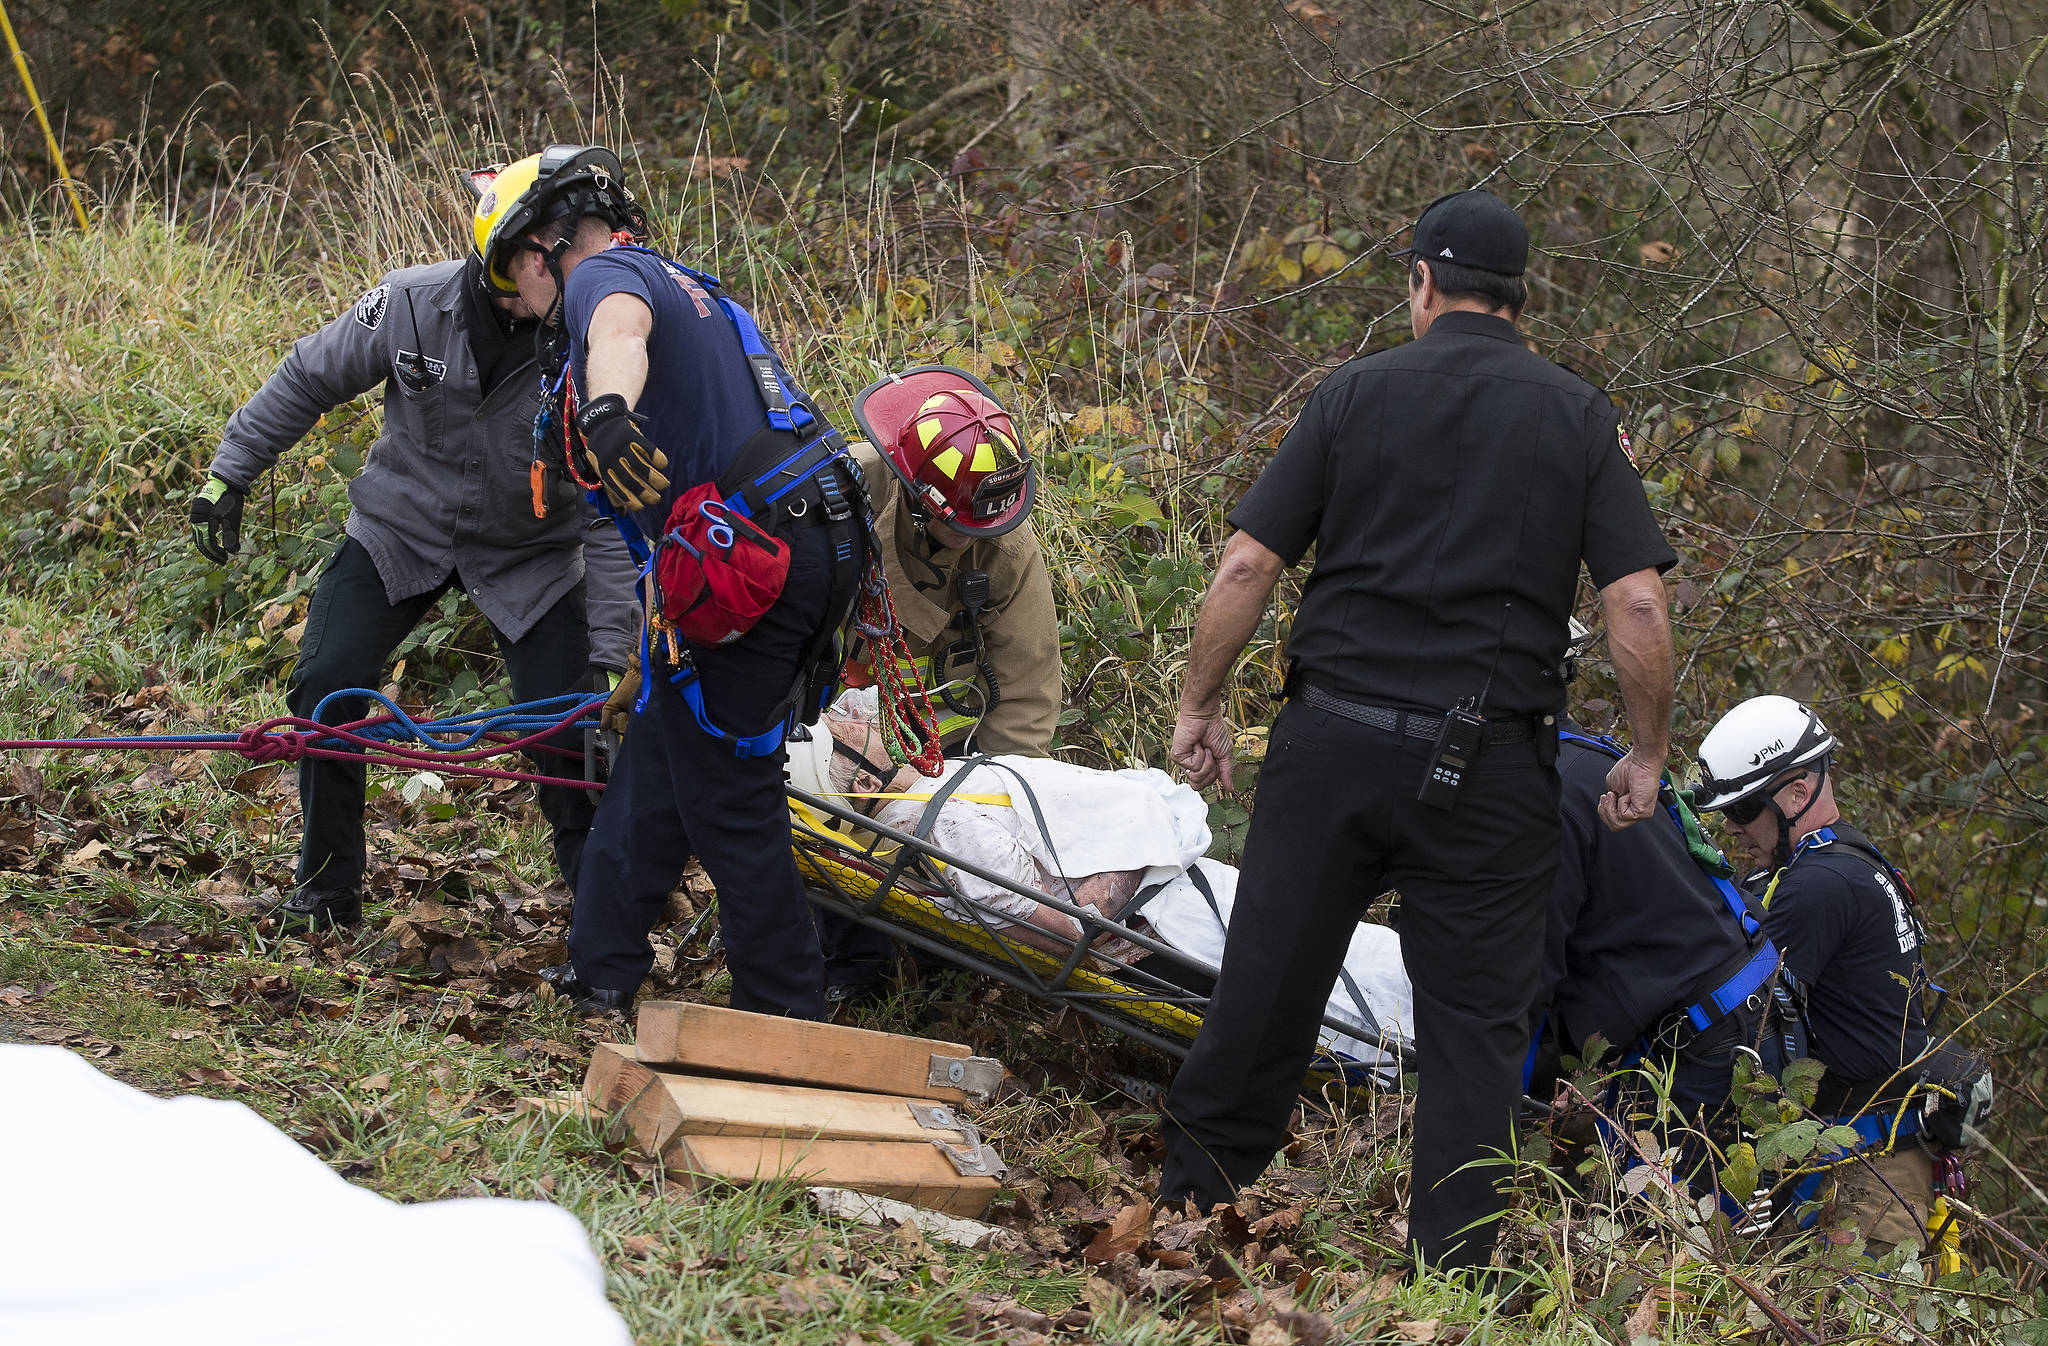 A man is rescued after his car went into a ravine at Riverview Road and 85th Avenue SE on Thursday in Snohomish. (Andy Bronson / The Herald)